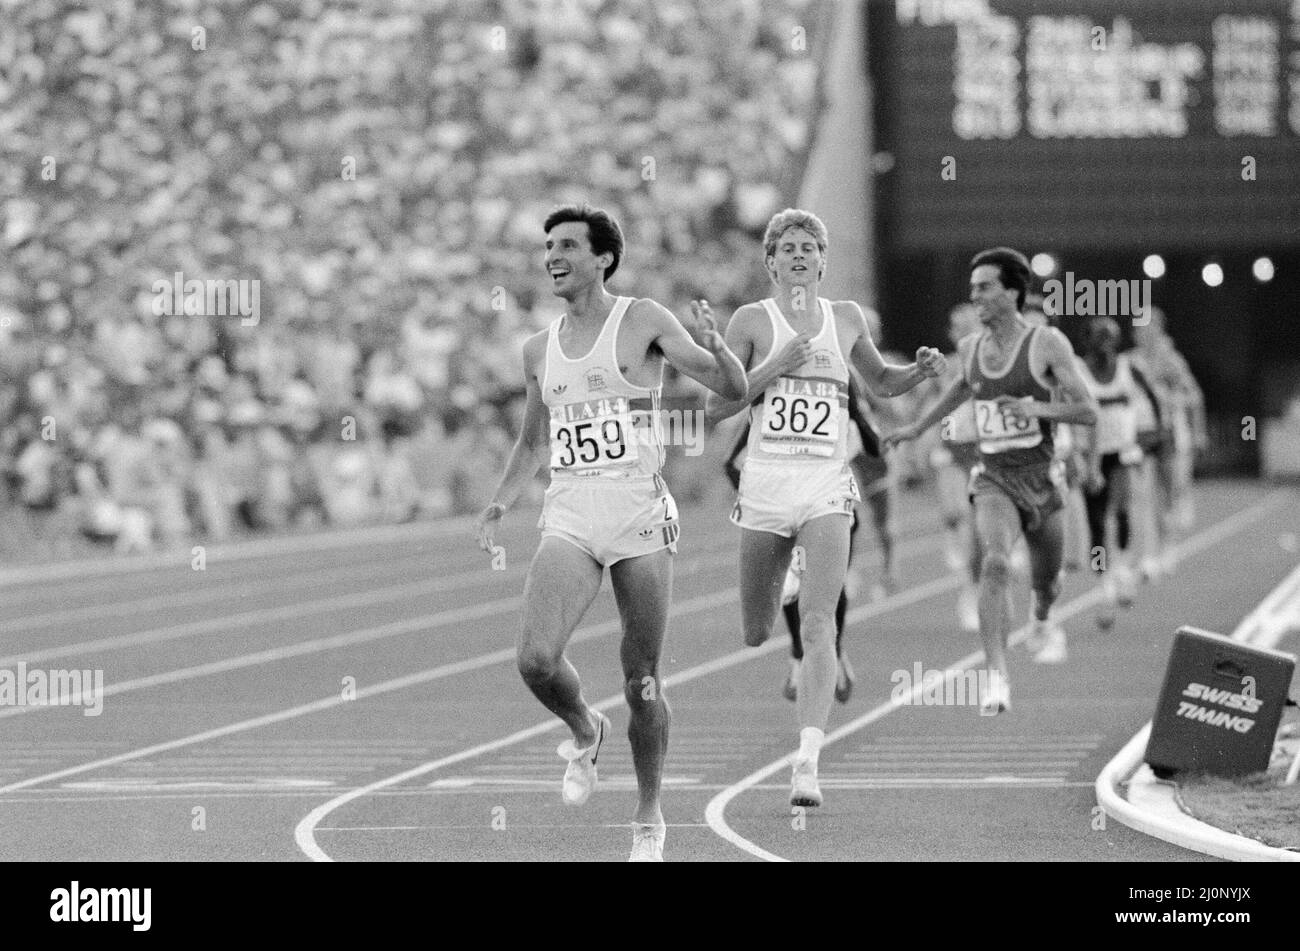 1984 Olympic Games in Los Angeles, USA. Mens Athletics. Great Britain's Sebastain Coe wins the 1500 metres gold medal followed by fellow Brit Steve Cram who took silver. 11th August 1984. Stock Photo